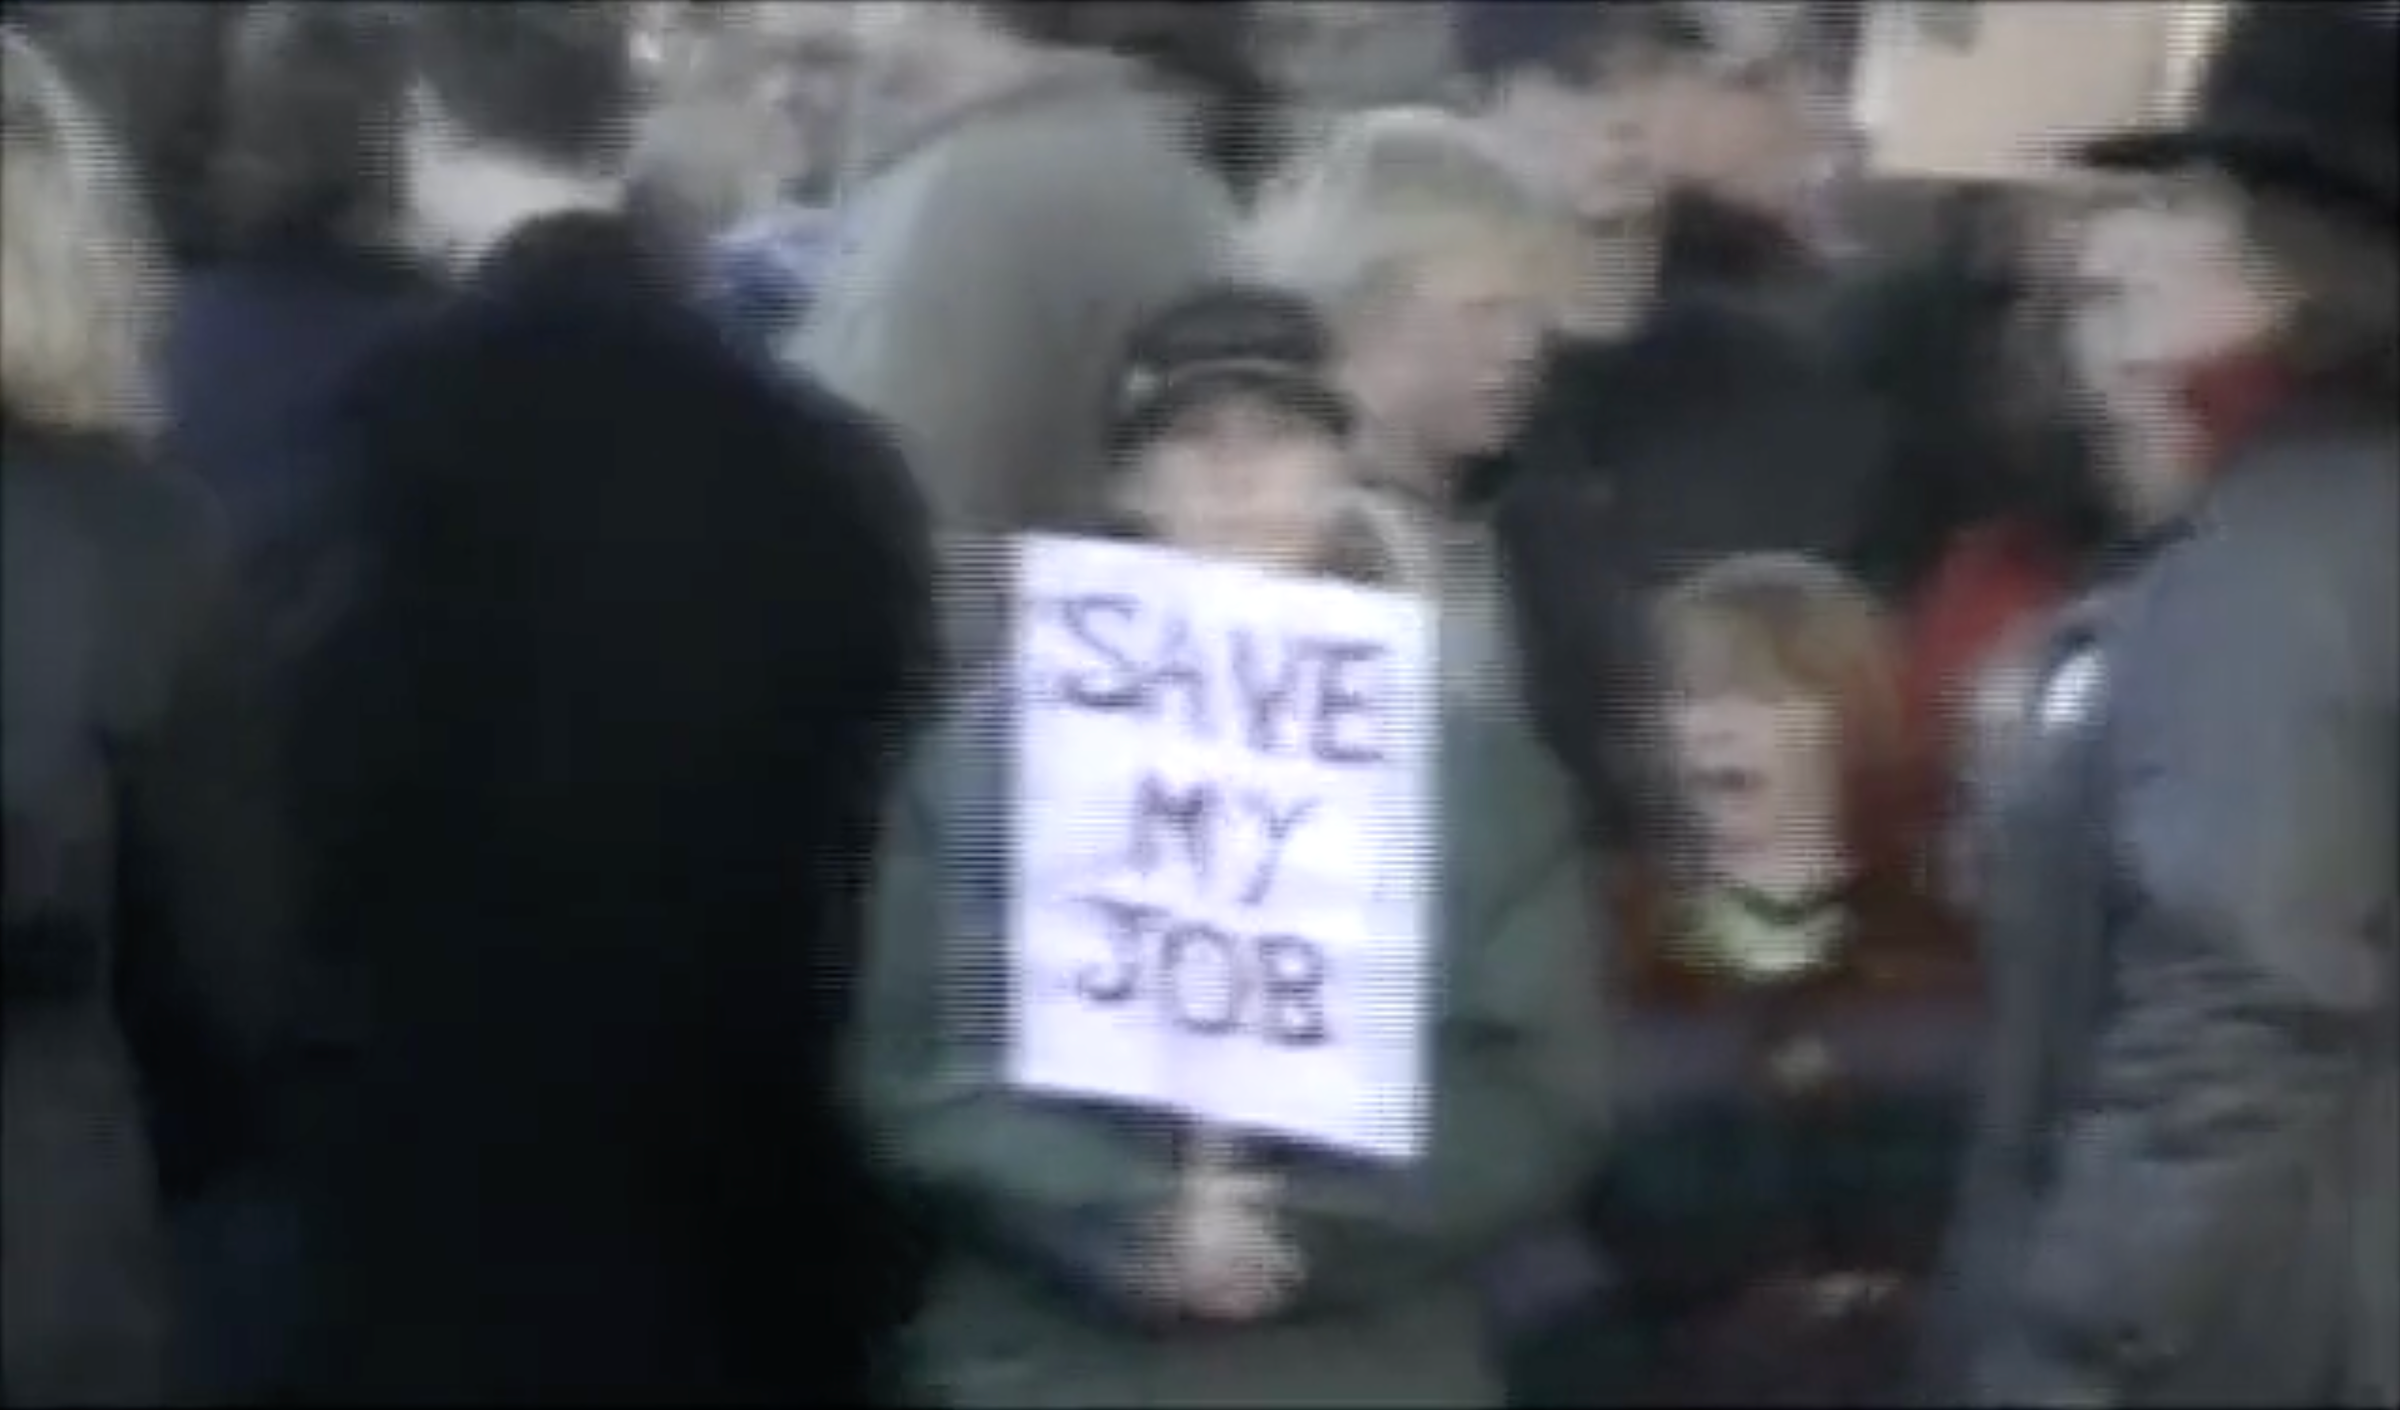 Shaky image of a crowd of people with one person looking forward at the camera holding a protest sign which reads 'SAVE MY JOB'.